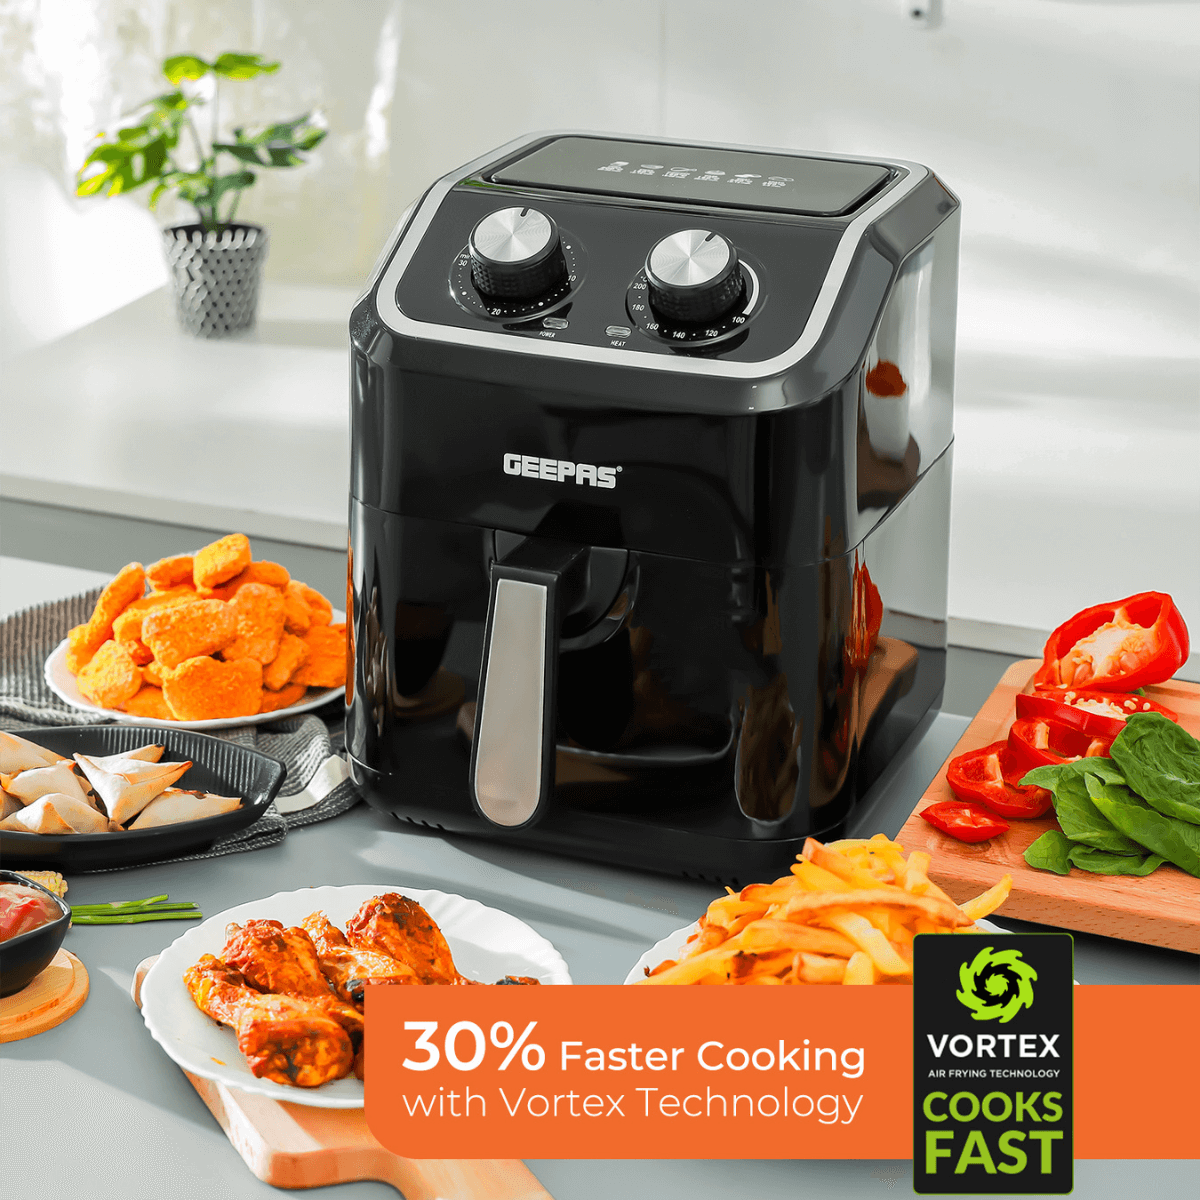 The 5L air fryer on a kitchen countertop, with different dishes of food around it. The banner shows the air fryer vortex cooking technology.